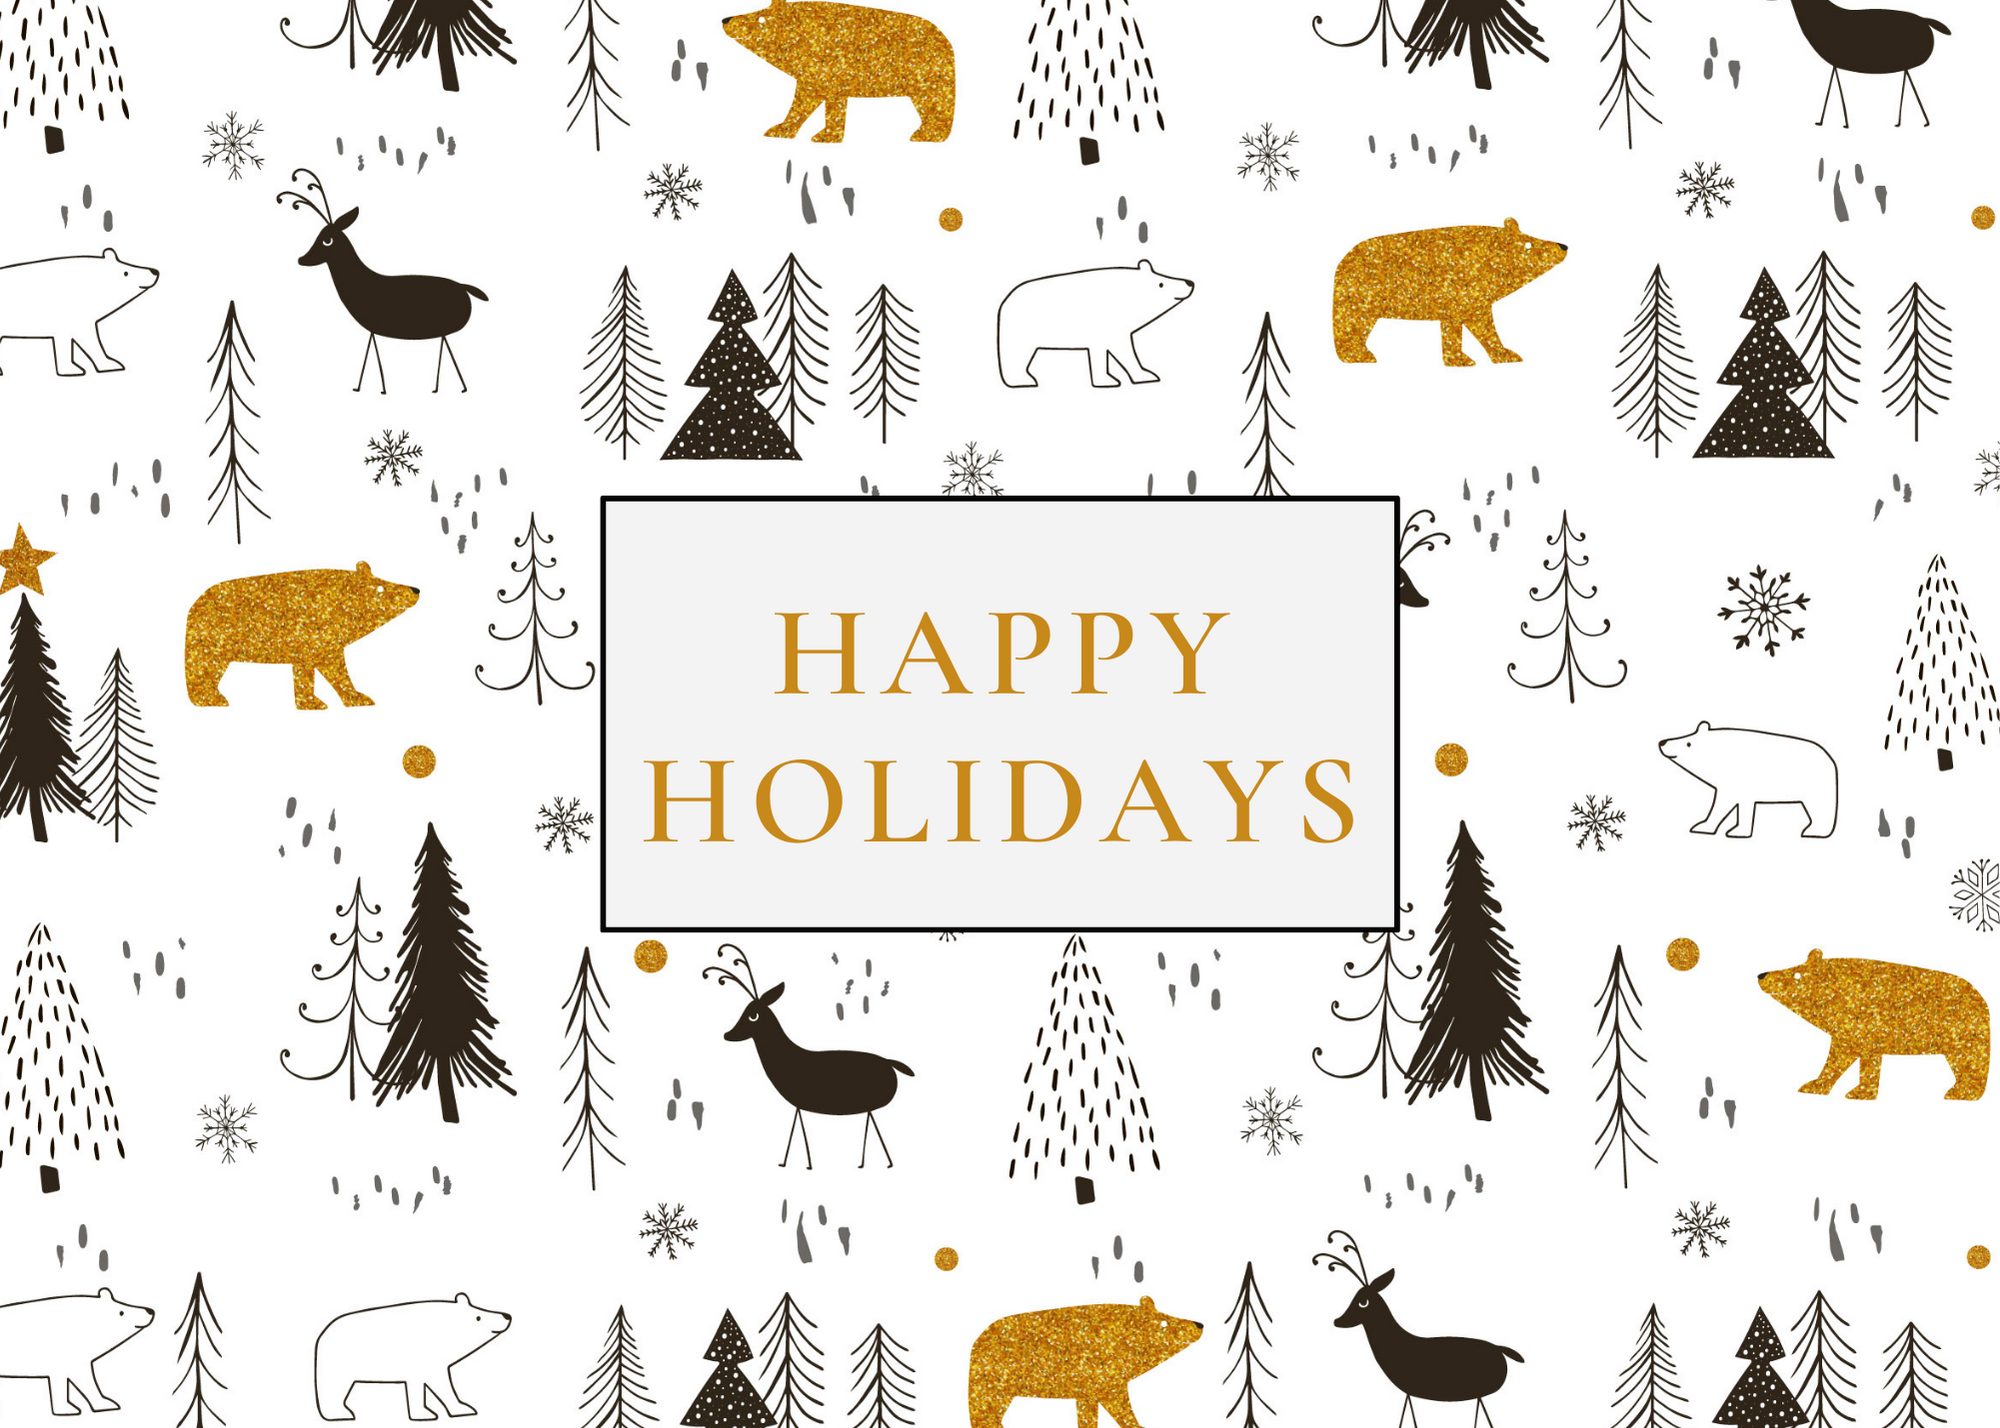 White seed paper greeting cards says "Happy Holidays" with black white and gold forest animals and trees